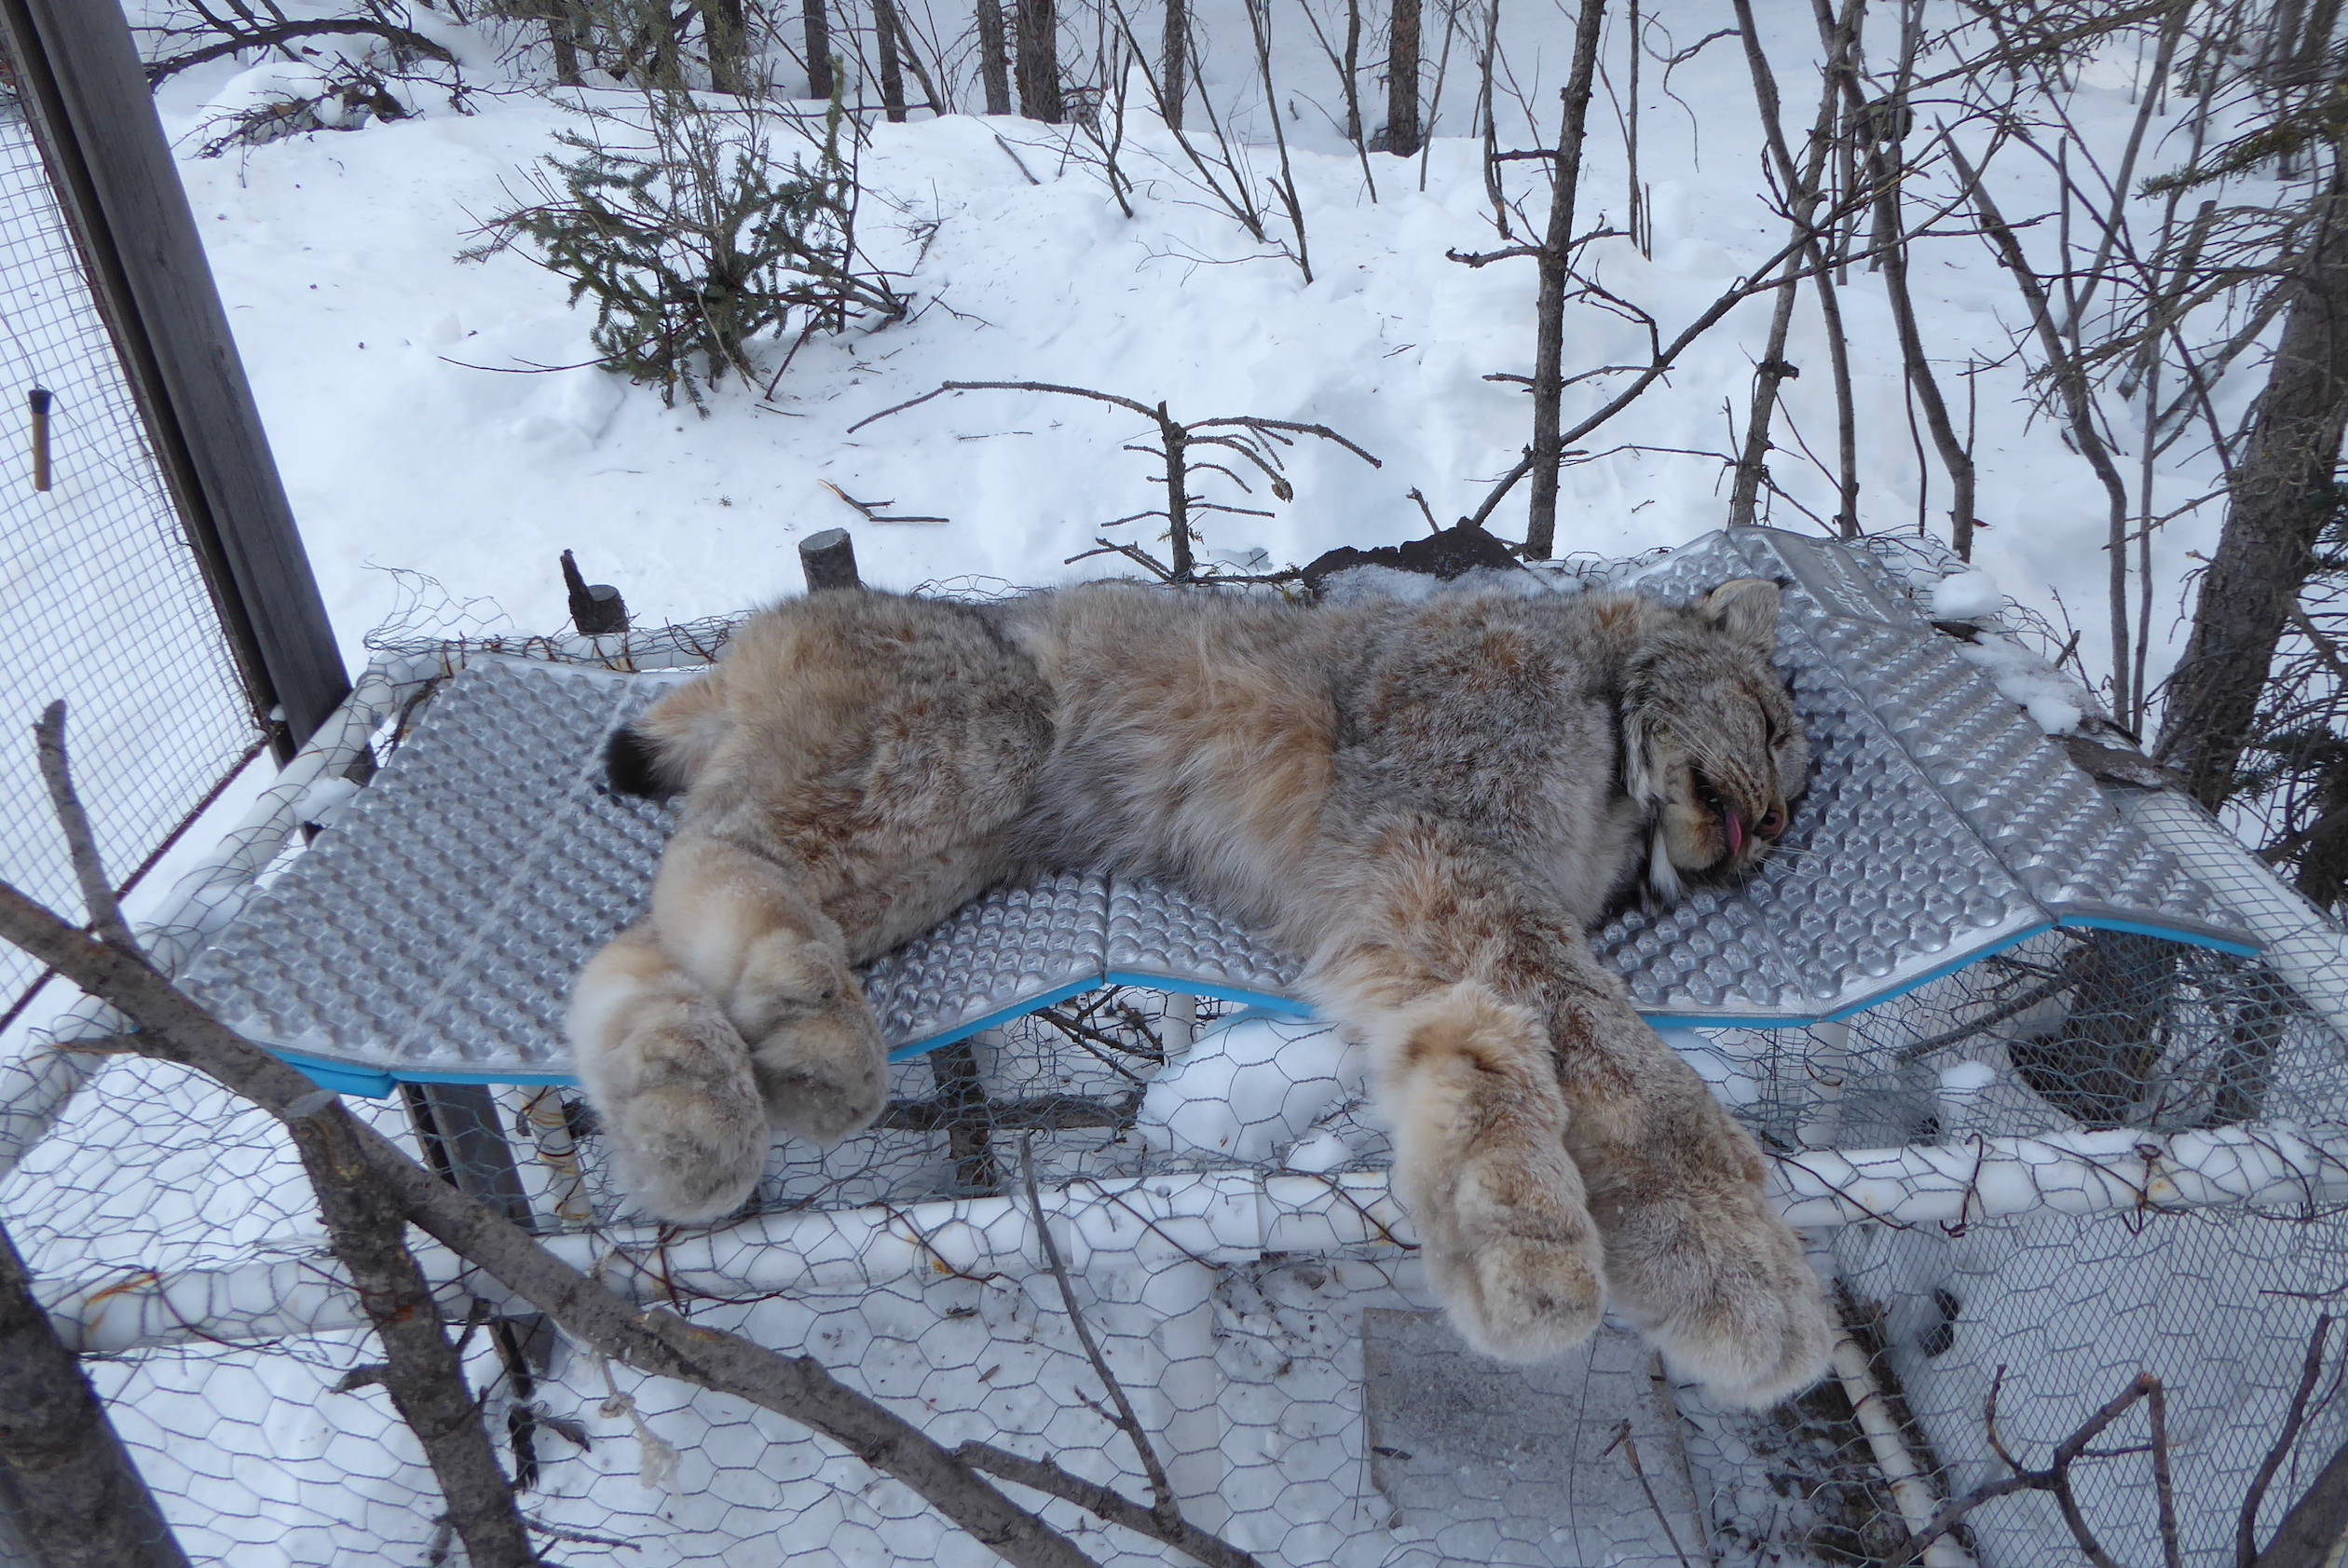 A lynx lies upon a camping-style foam pad on top of a chicken-wire cage in the snow.